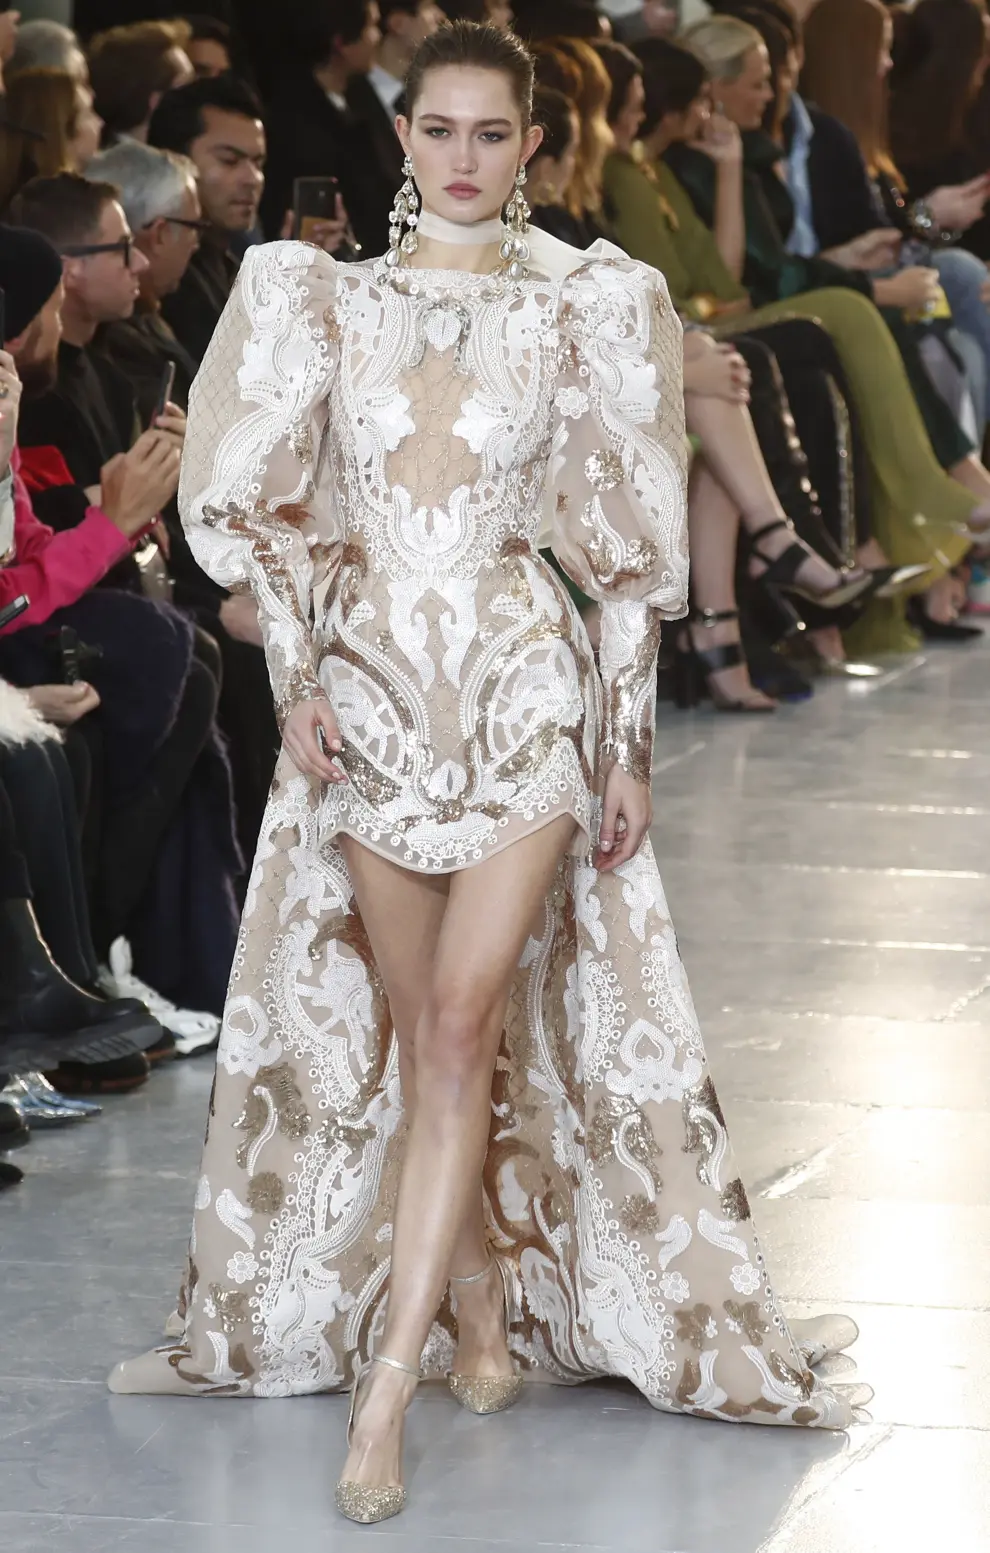 Paris (France), 22/01/2020.- A model presents a creation from the Spring/Summer 2020 Haute Couture collection by Lebanese designer Elie Saab during the Paris Fashion Week, in Paris, France, 22 January 2020. The presentation of the Haute Couture collections runs from 20 to 23 January 2020. (Moda, Francia) EFE/EPA/IAN LANGSDON Elie Saab - Runway - Paris Haute Couture Fashion Week S/S 2020